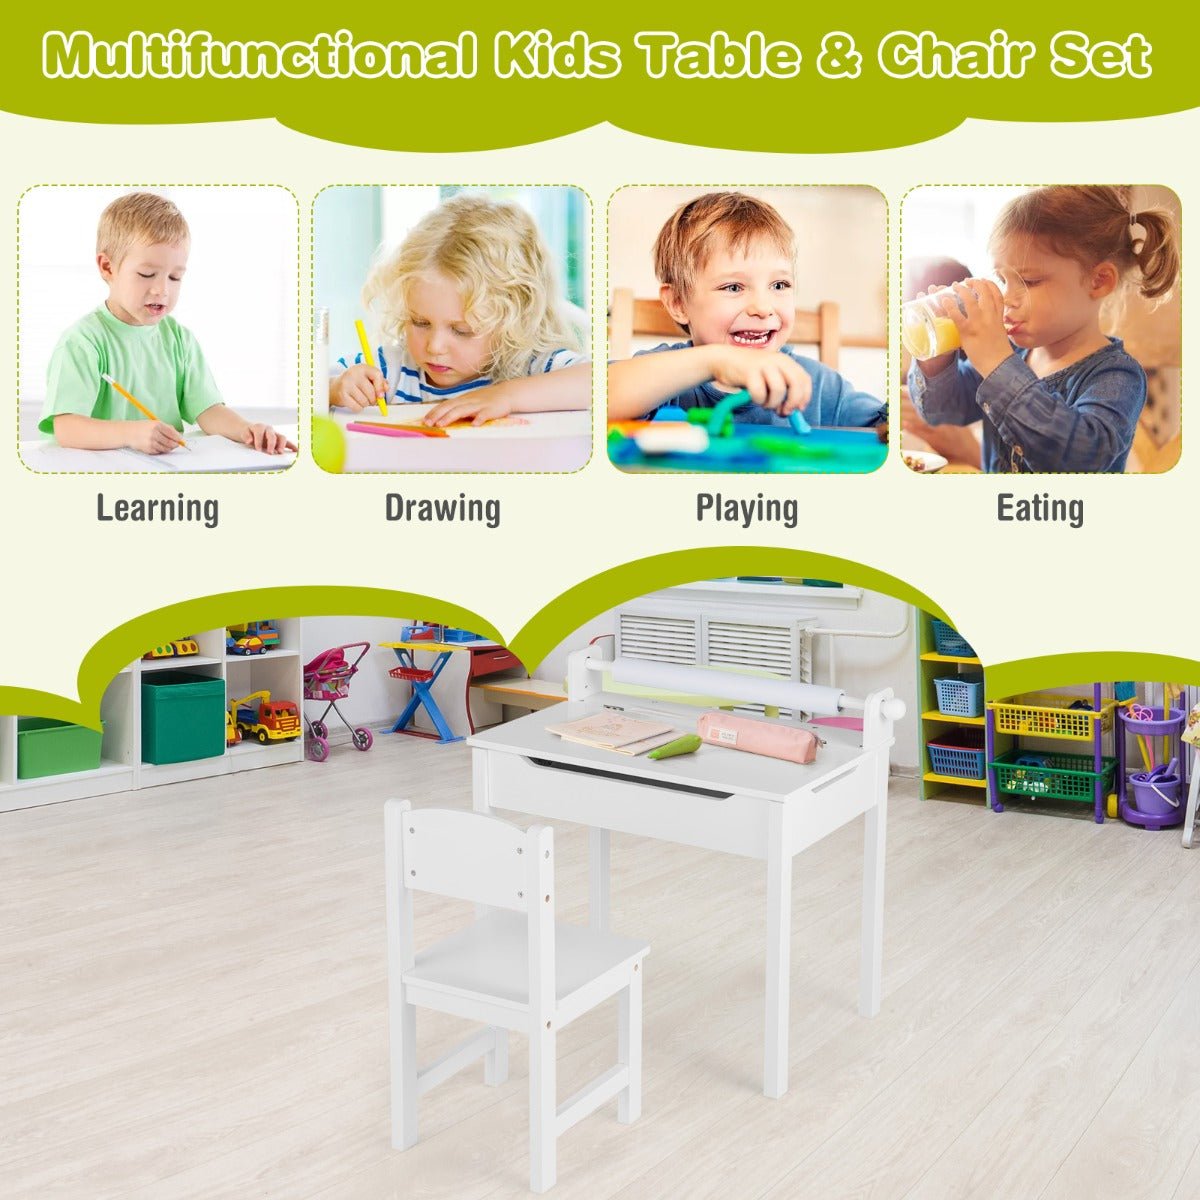 Children's Learning Space: Table & Chair Set with Paper Roll Holder